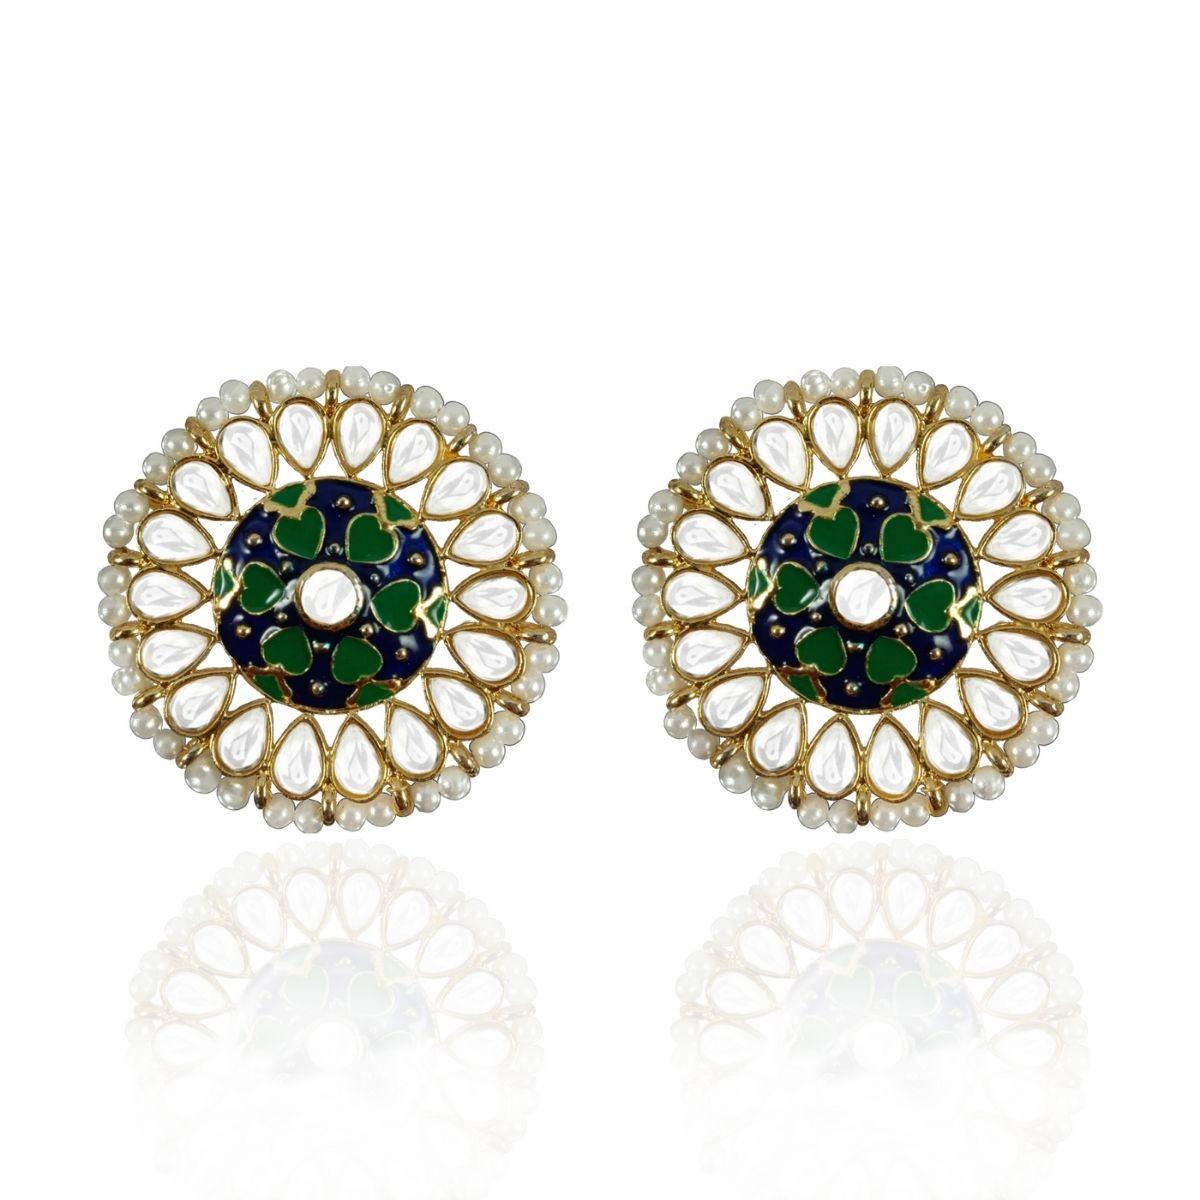 Antique vintage look With Enamel Work Round Earring - The Fineworld